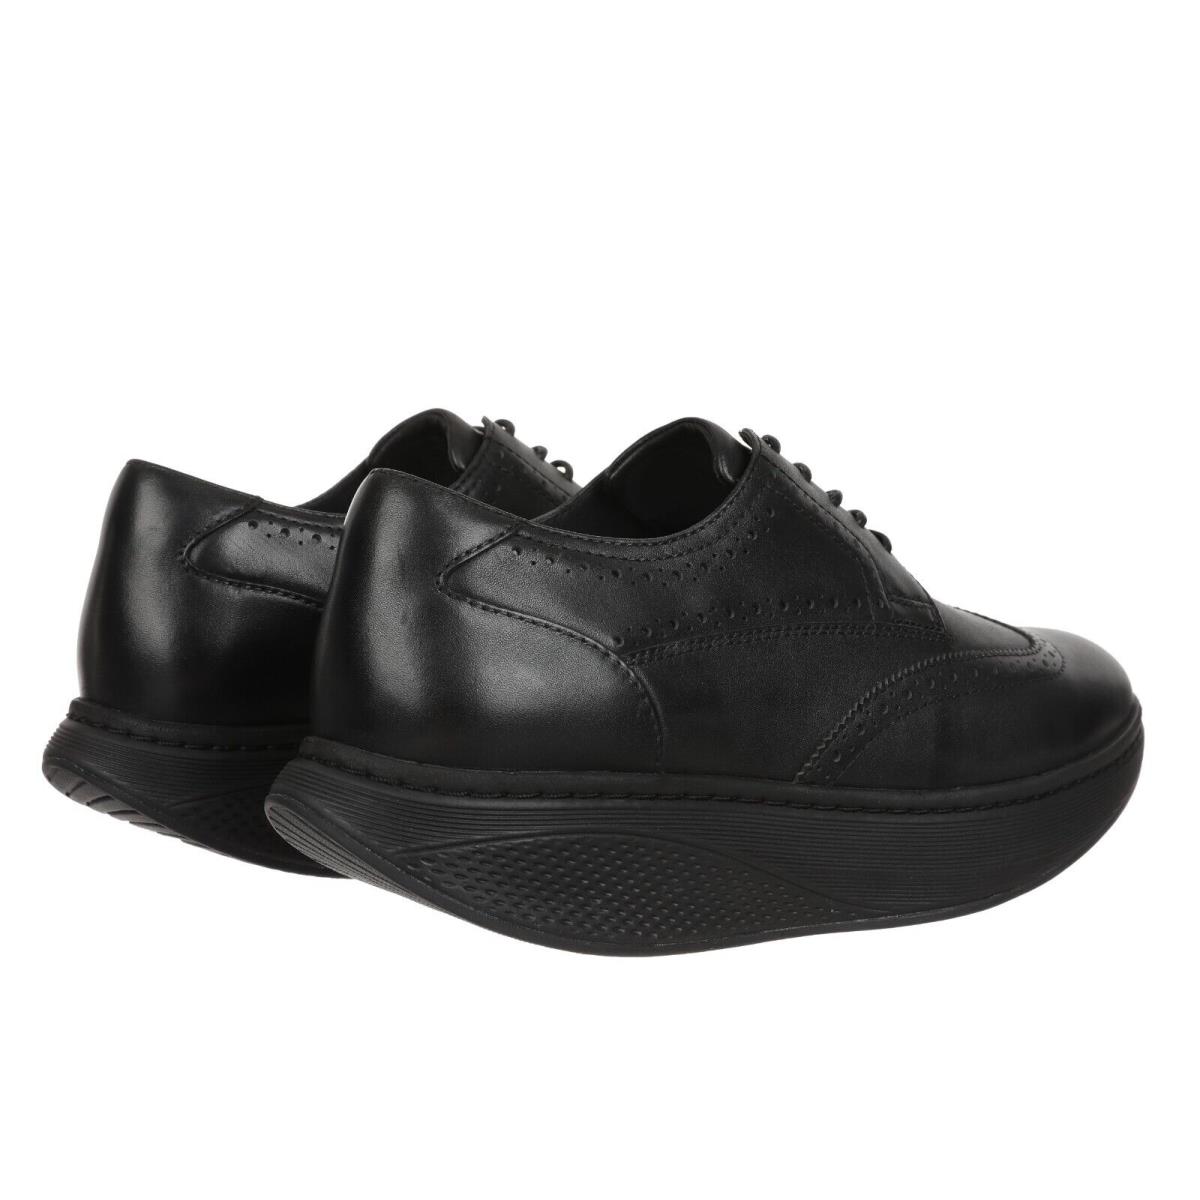 MBT shoes Wing - Black Calf Leather Manufacture 0